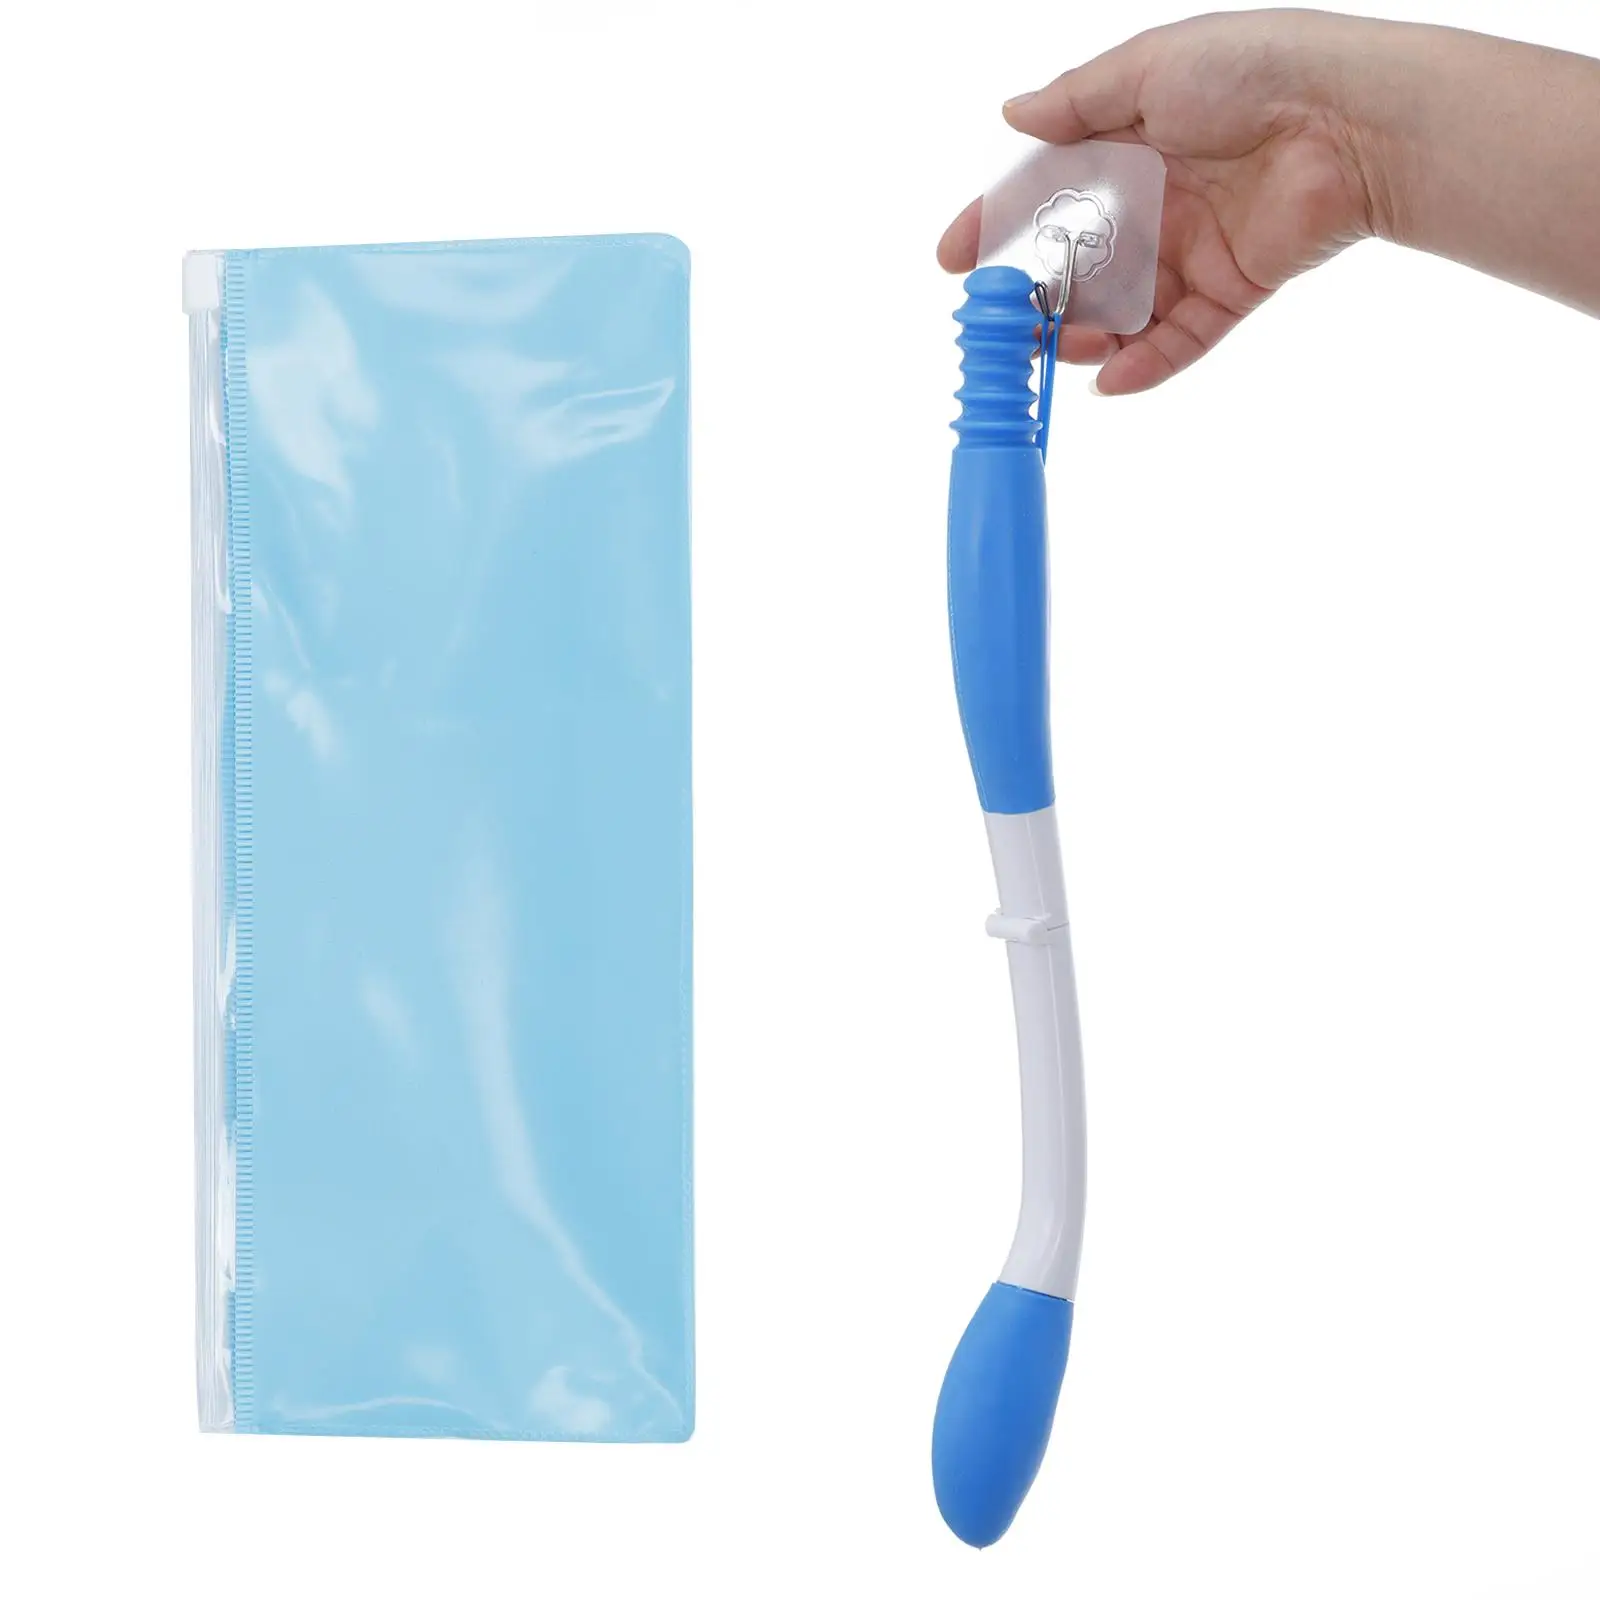 Toilet Aid Wiper Comfort Wipe Bottom Wiping Aid for Bathroom